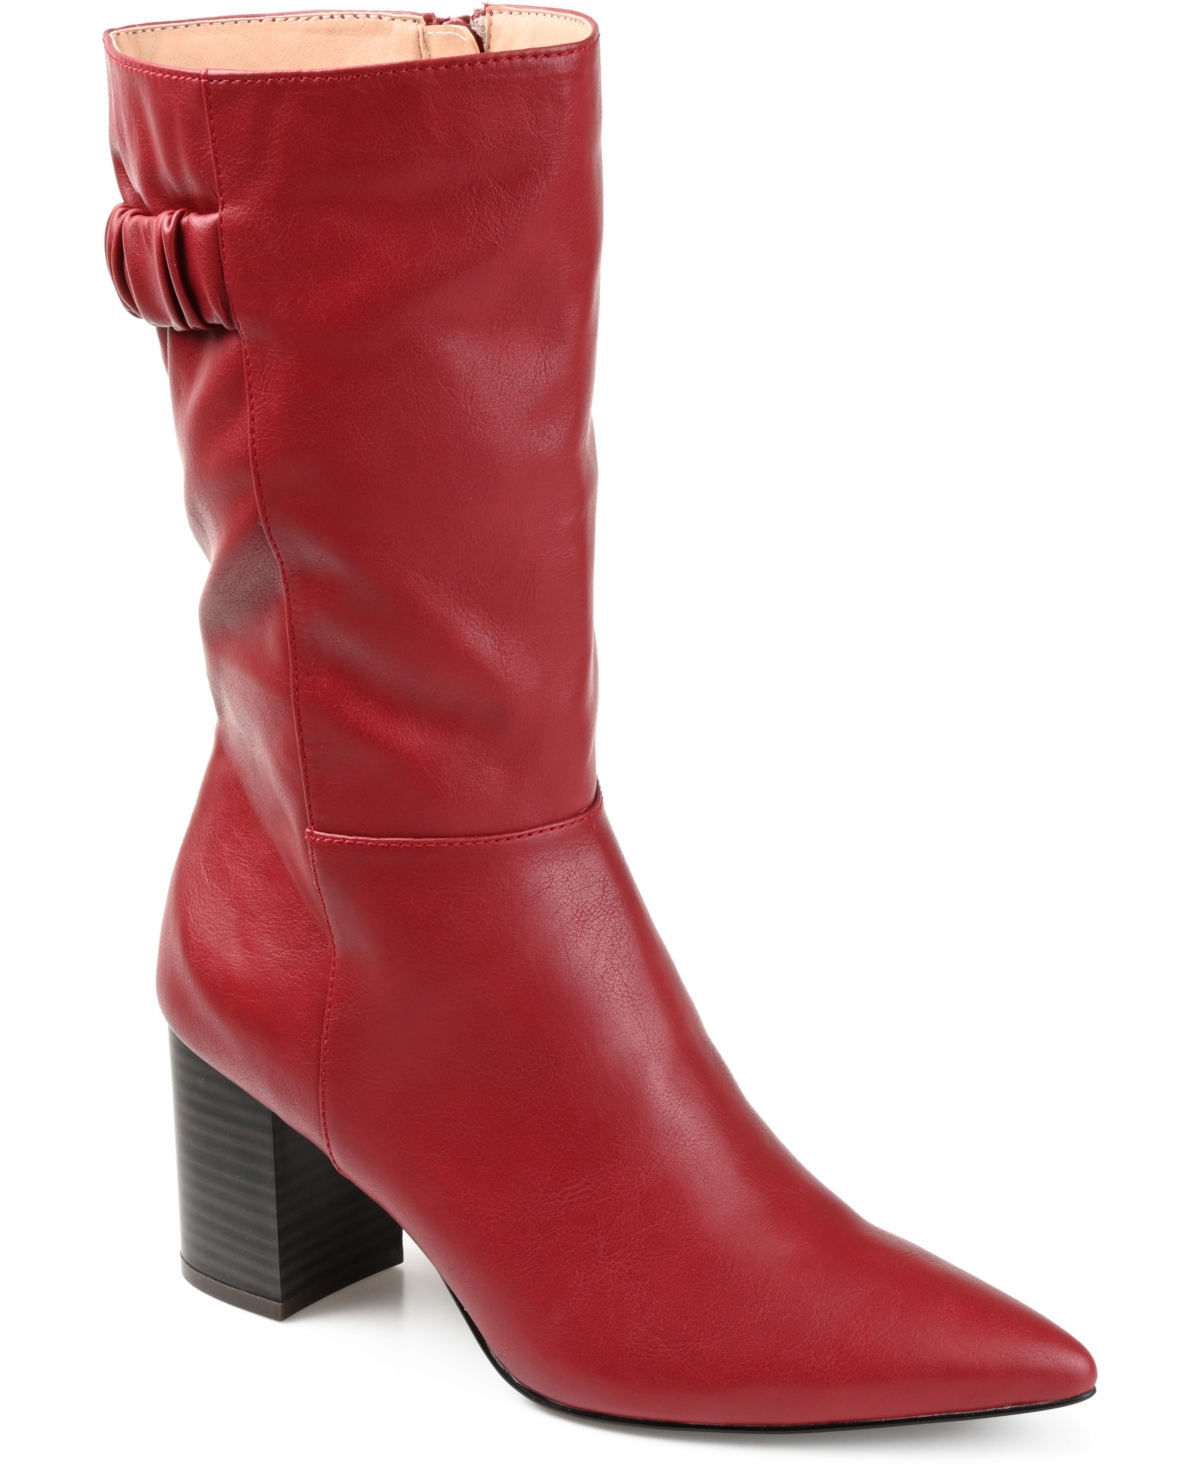 Retro Vintage Style Wide Shoes 1920s-1950s Journee Collection Womens Wilo Wide Calf Boots - Red $99.99 AT vintagedancer.com